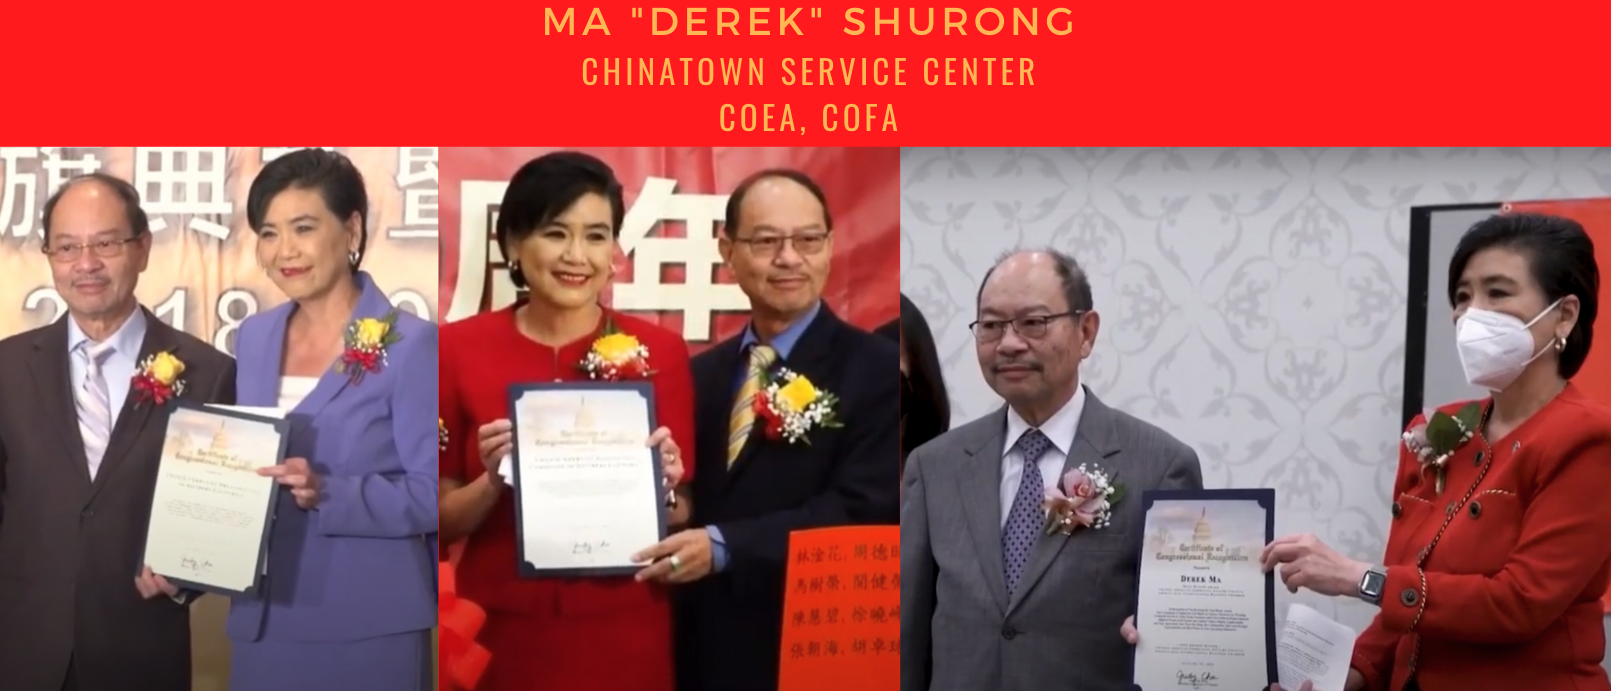 Rep. Judy Chu has granted certificates of Congressional recognition to 10 individuals who have belonged to alleged front groups serving the United Front Work Department of the Chinese Communist Party. Image created by the Daily Caller News Foundation.